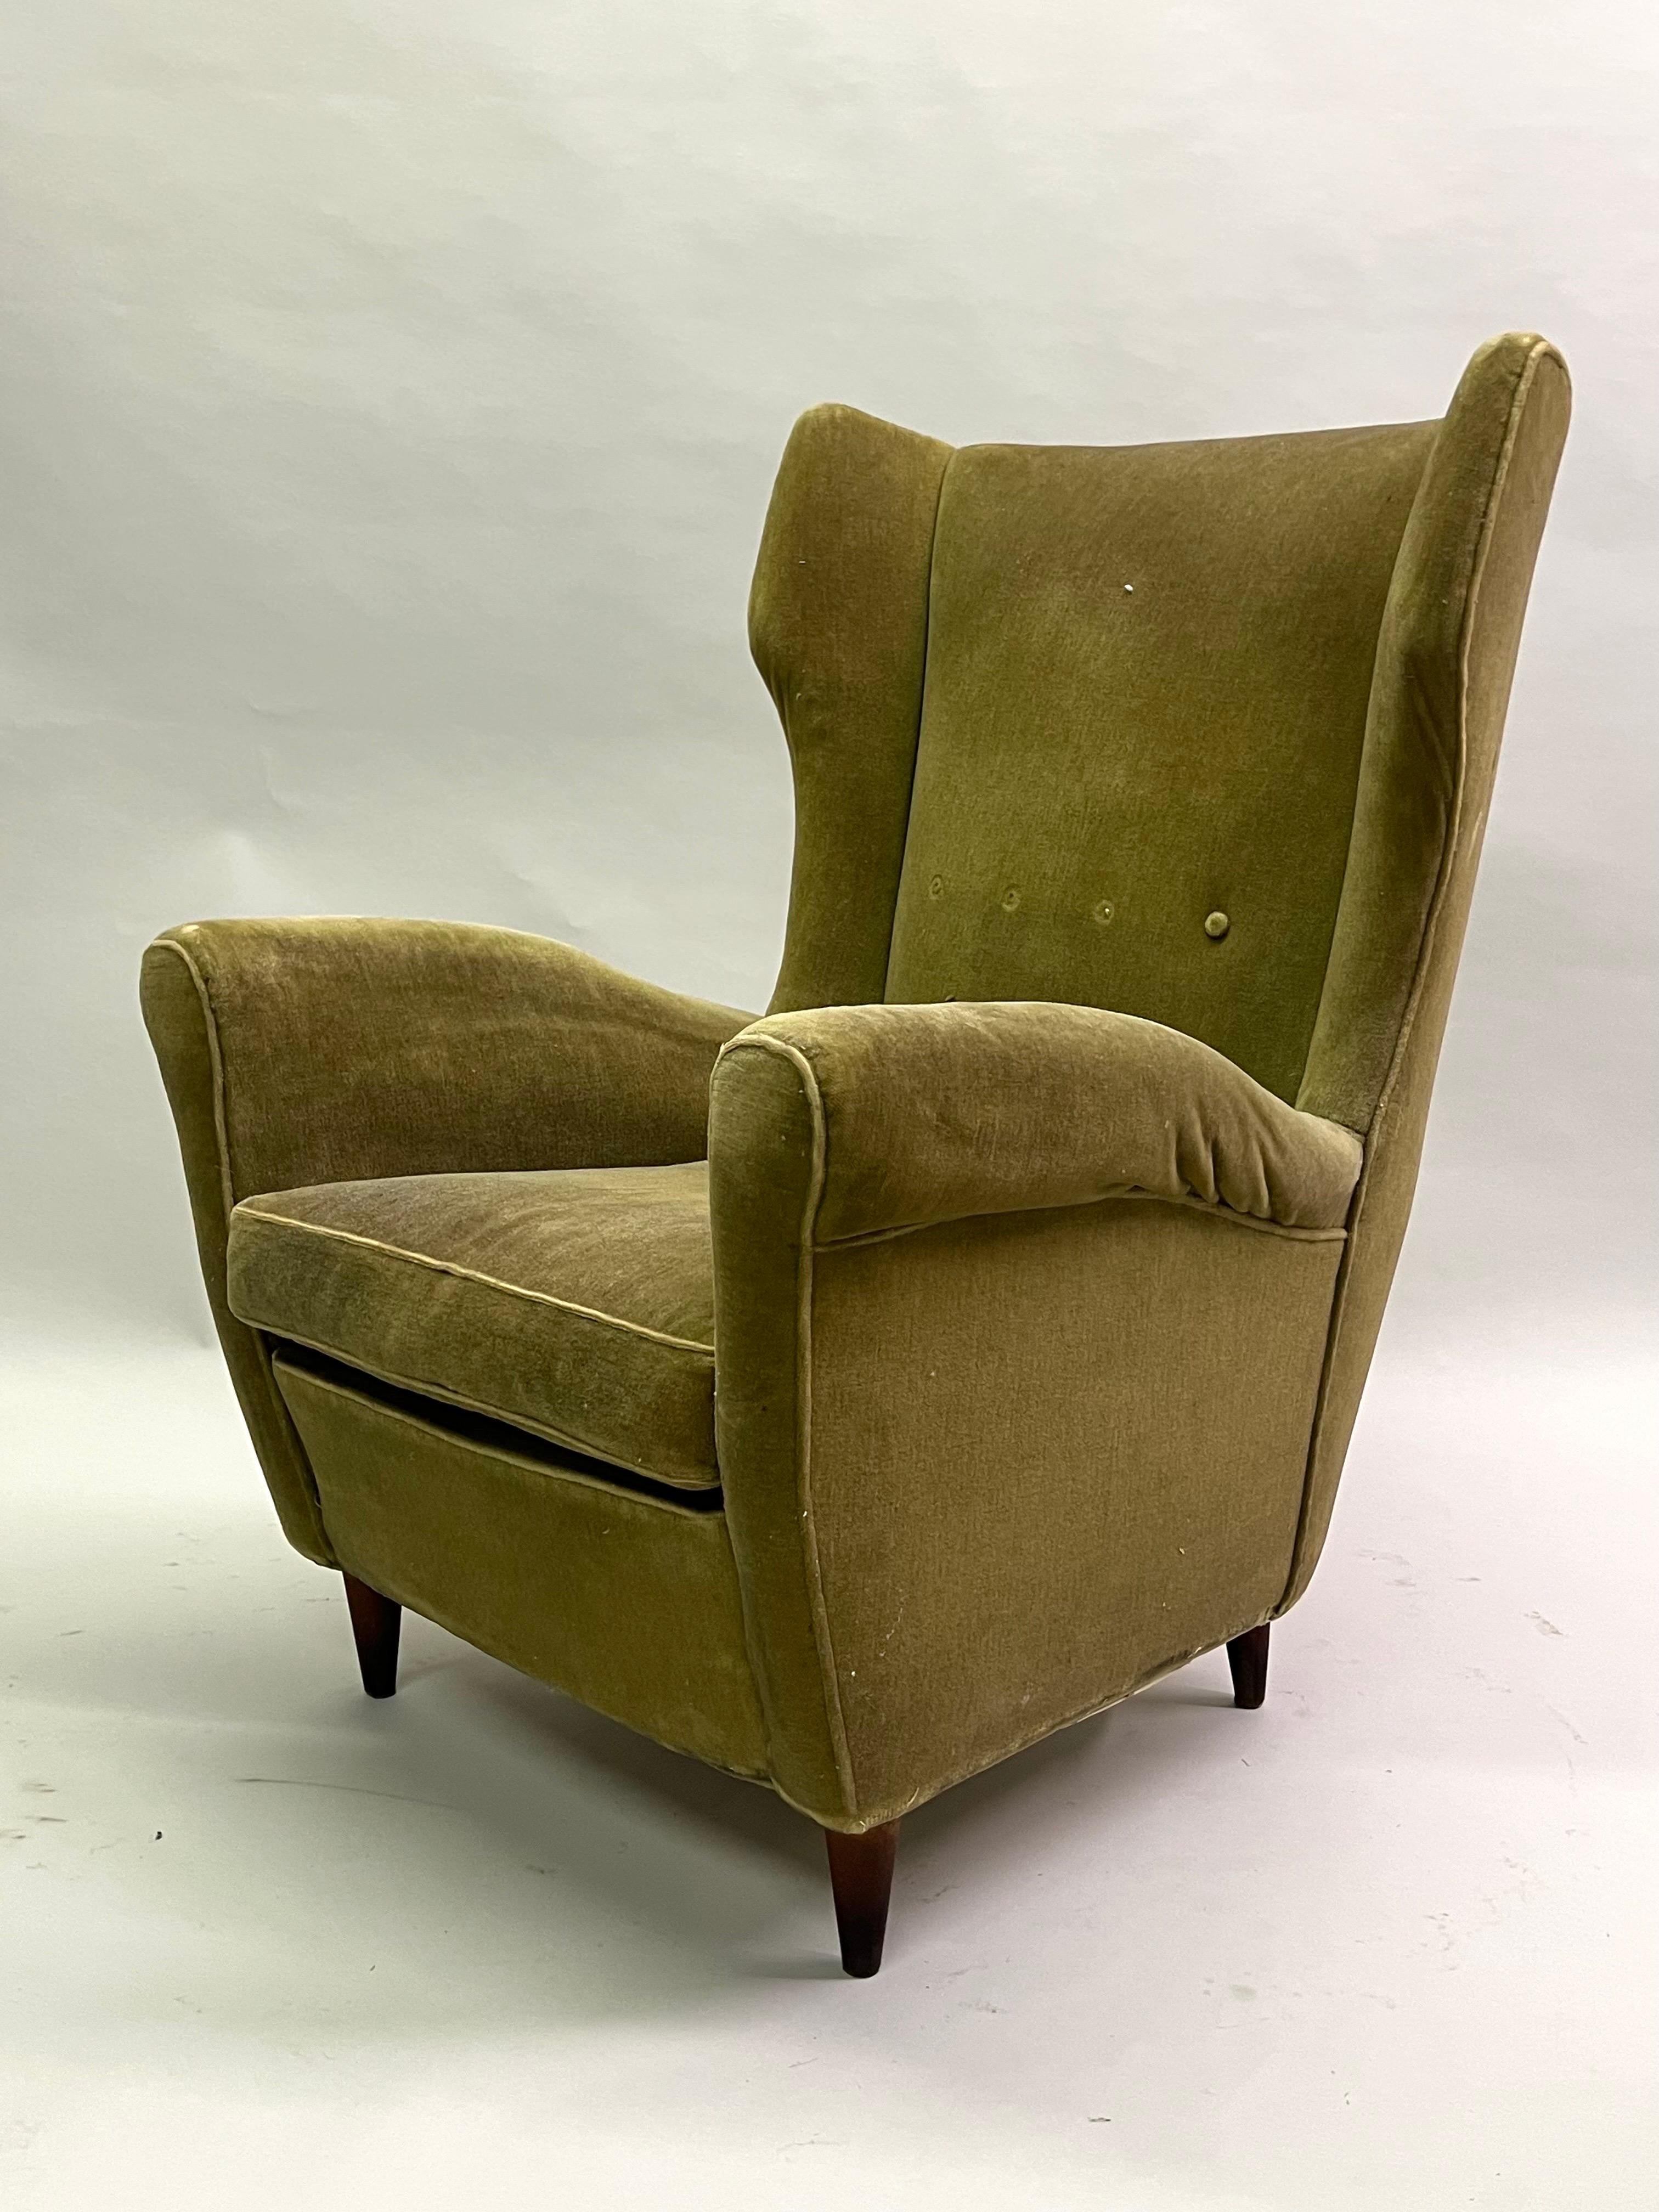 Pair of Italian Mid-Century Wingback Lounge Chairs Attr. to Gio Ponti, Model 512 For Sale 2